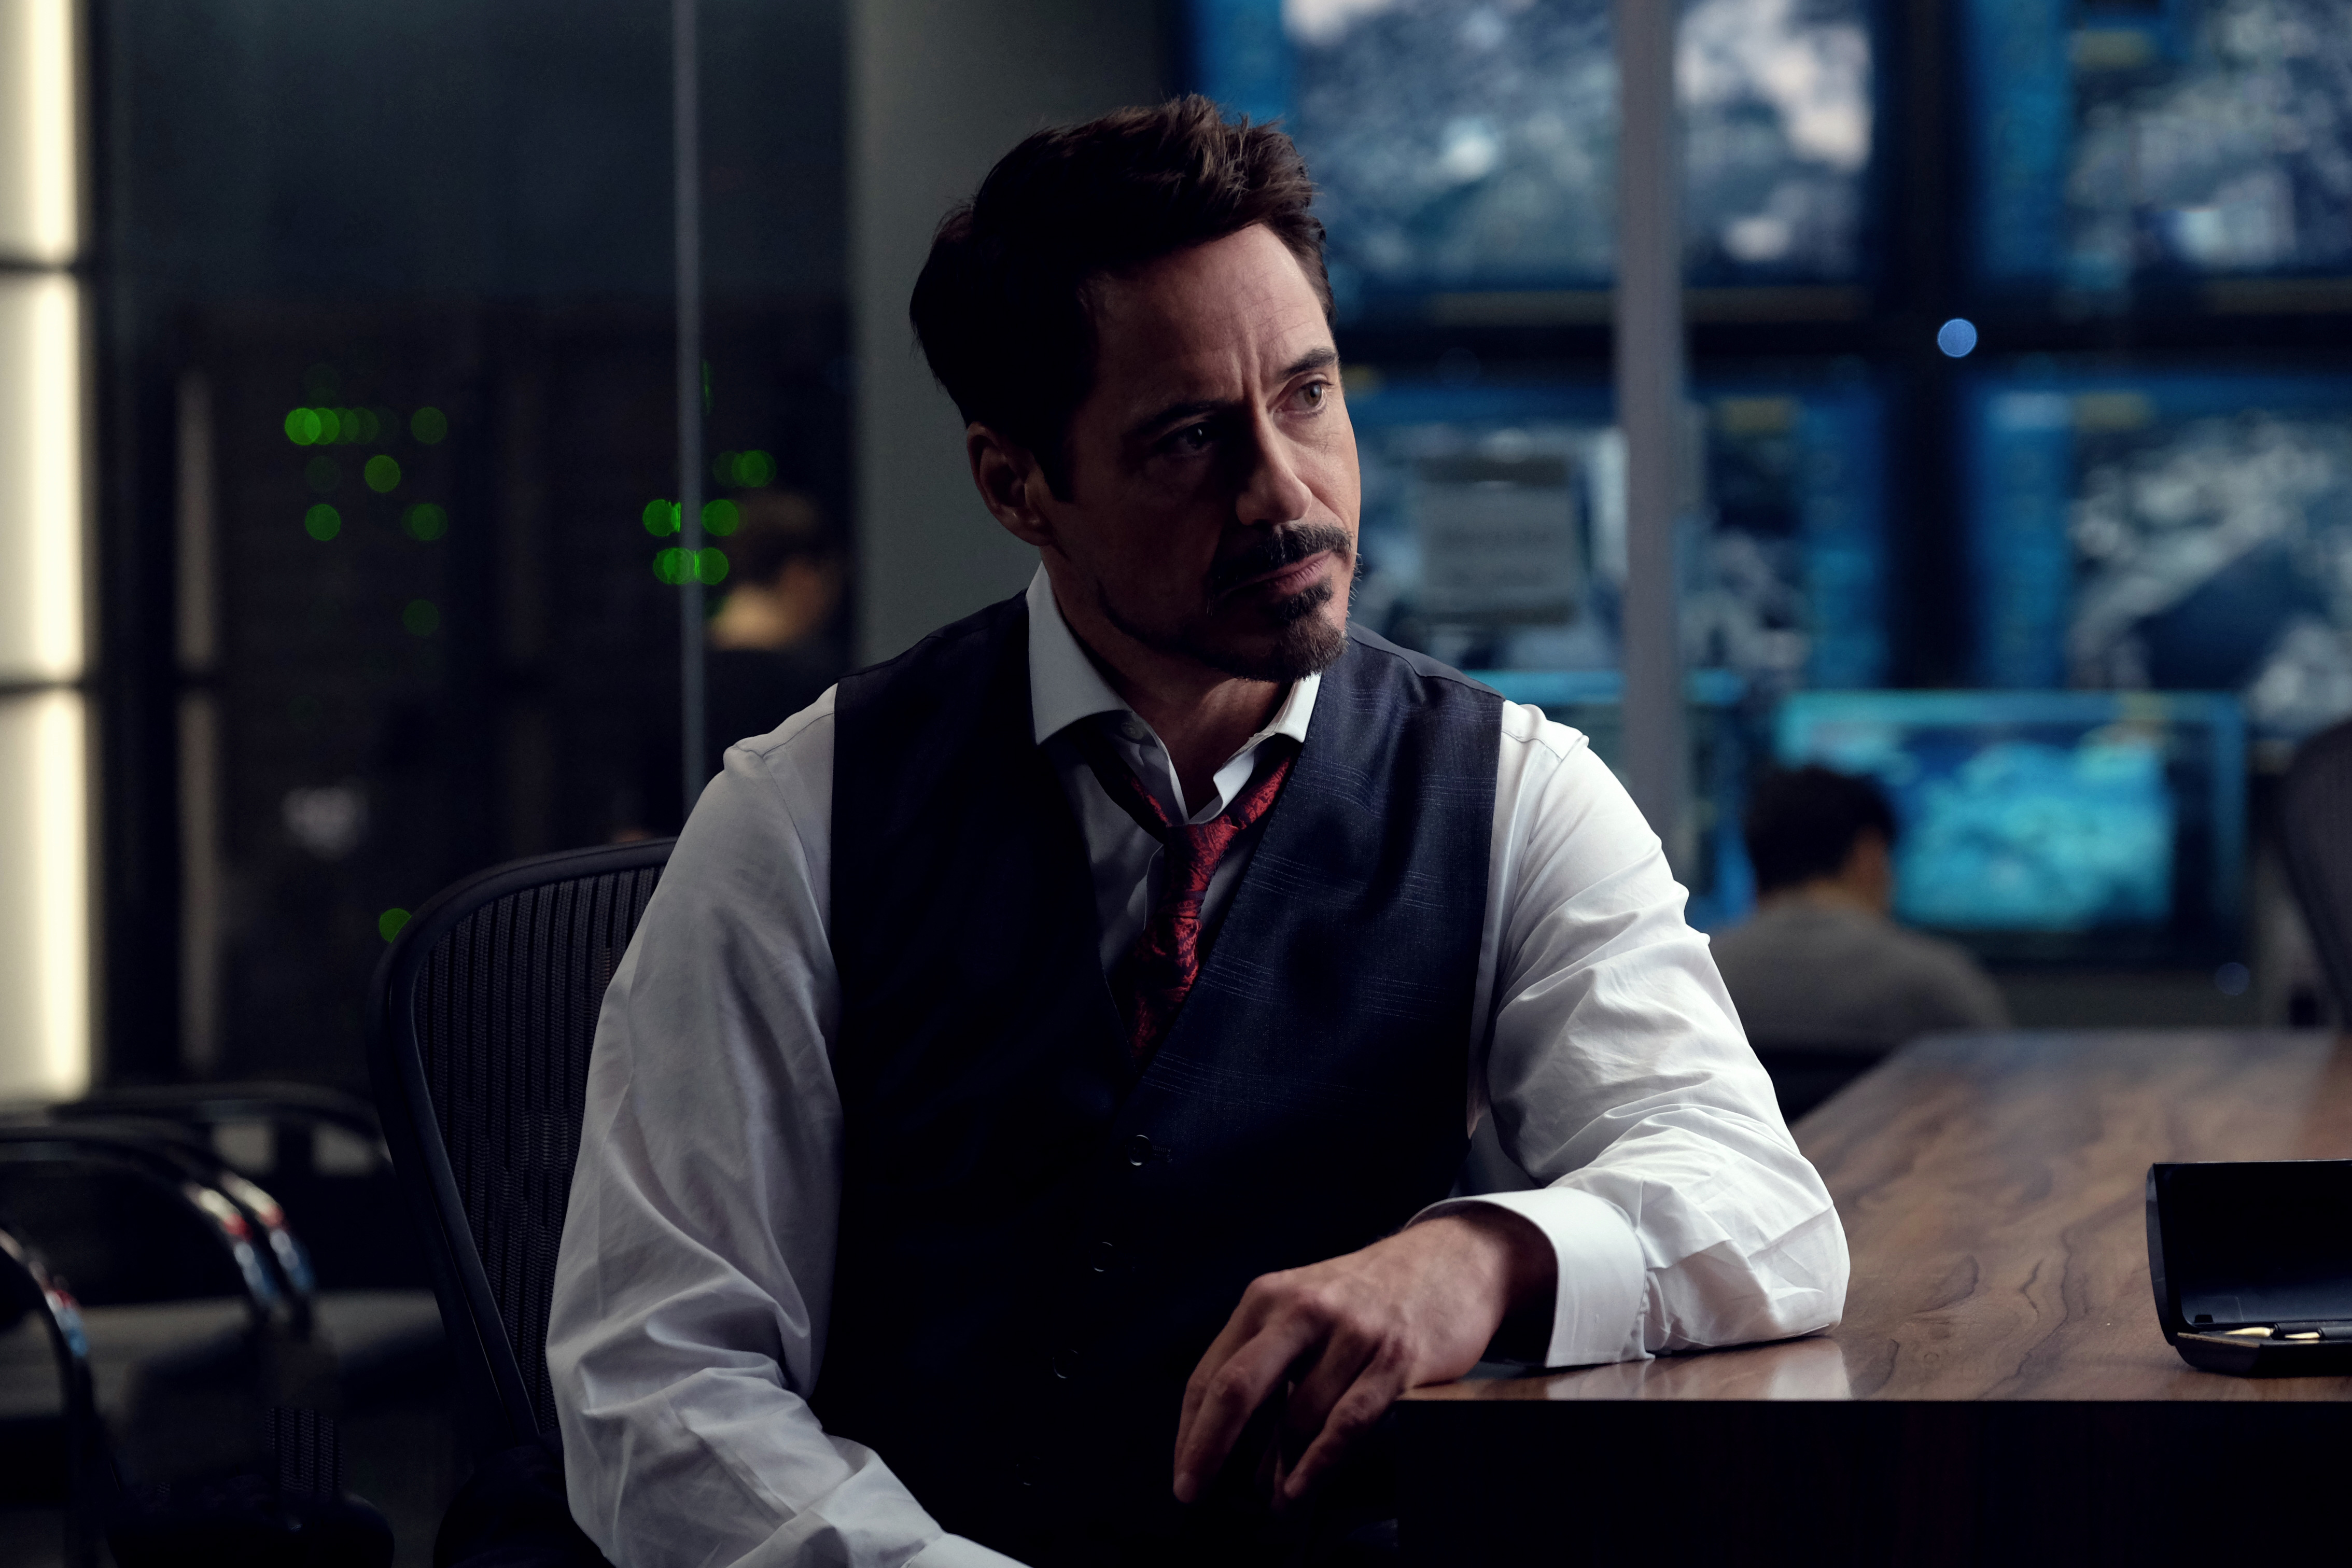 tony stark hd wallpapers,white collar worker,sitting,photography,suit,businessperson